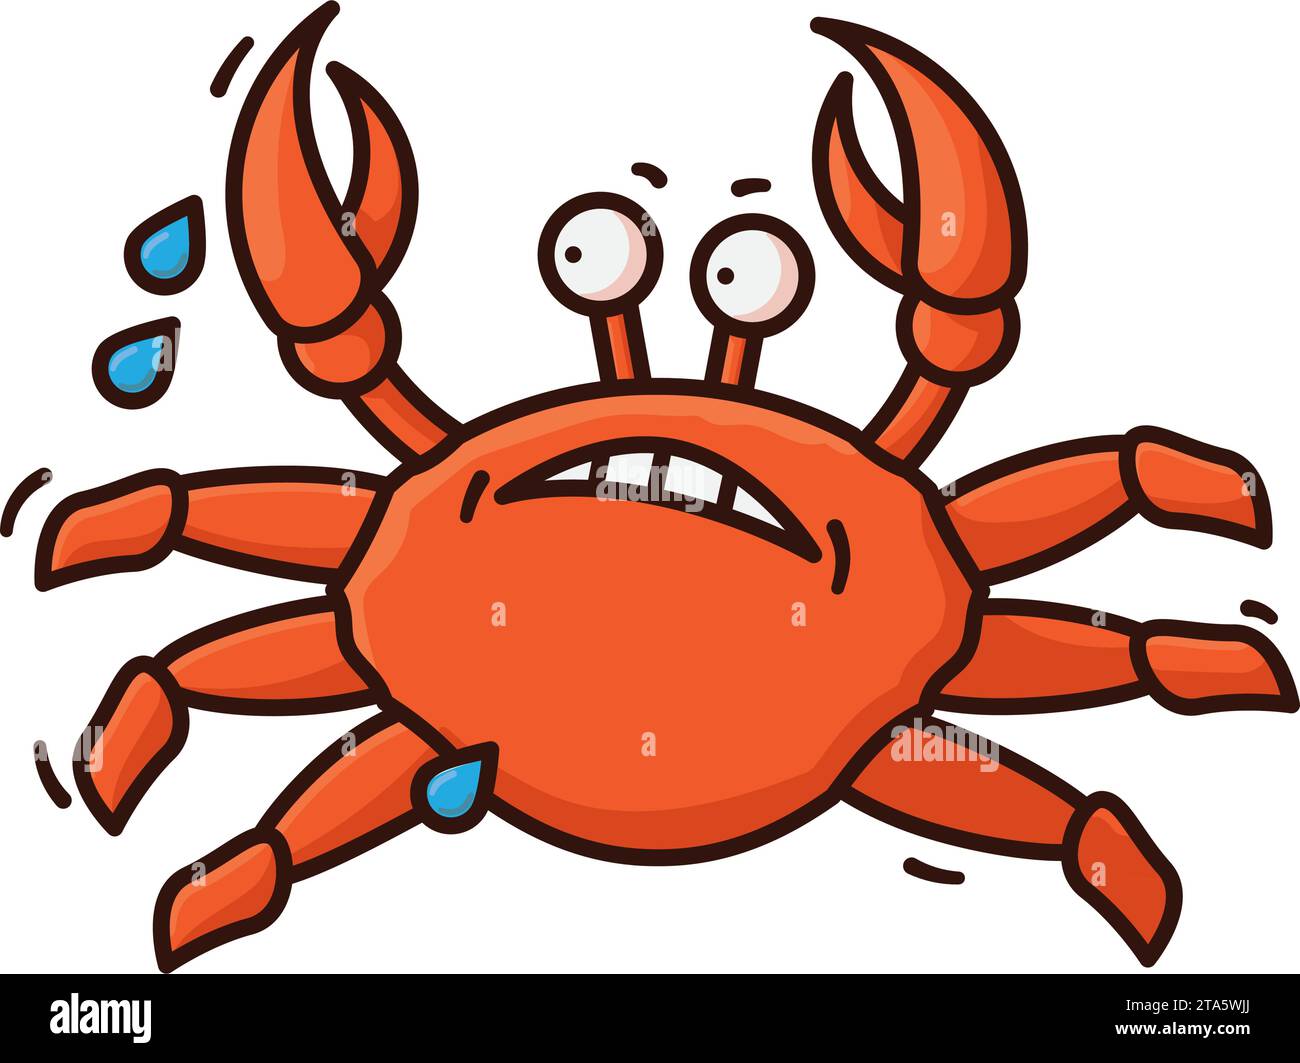 Crab crawling away in fear cartoon isolated vector illustration for Crab Meat Day on March 9 Stock Vector